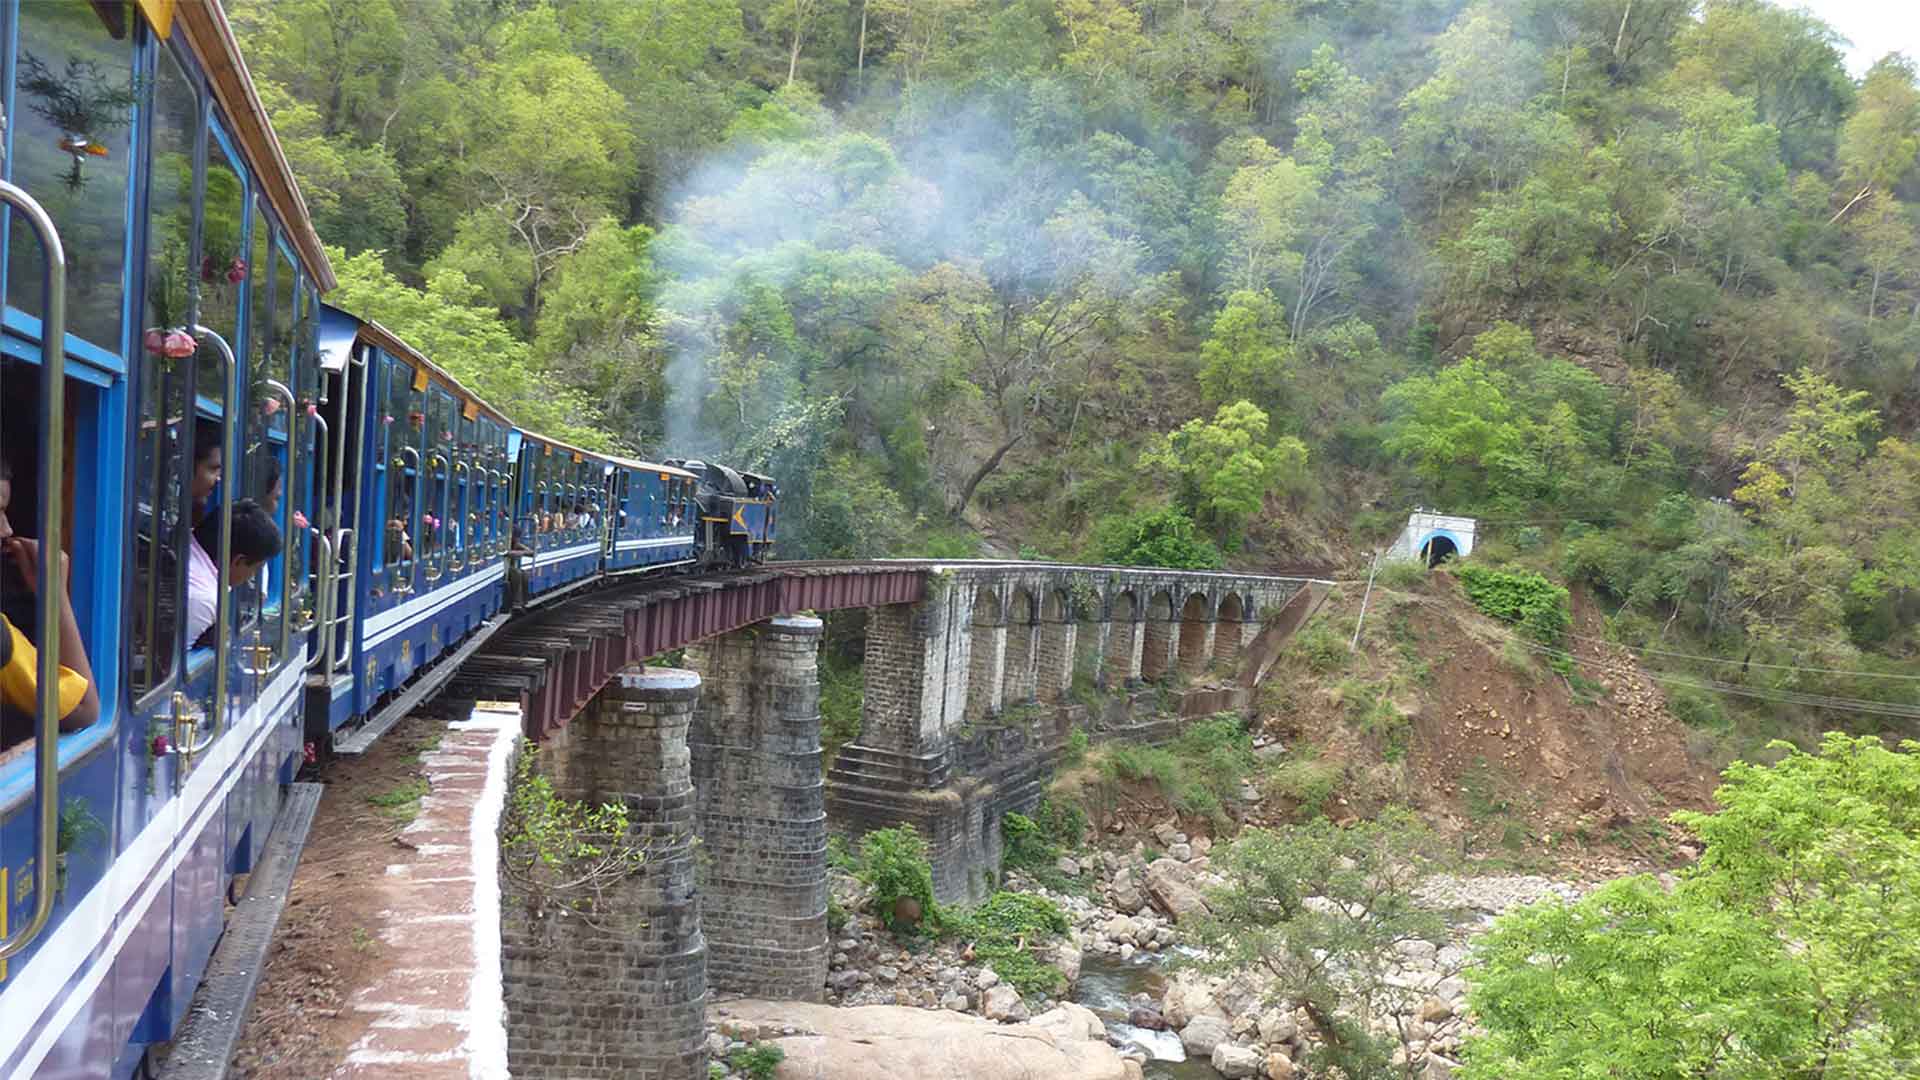 mysore to ooty travel packages